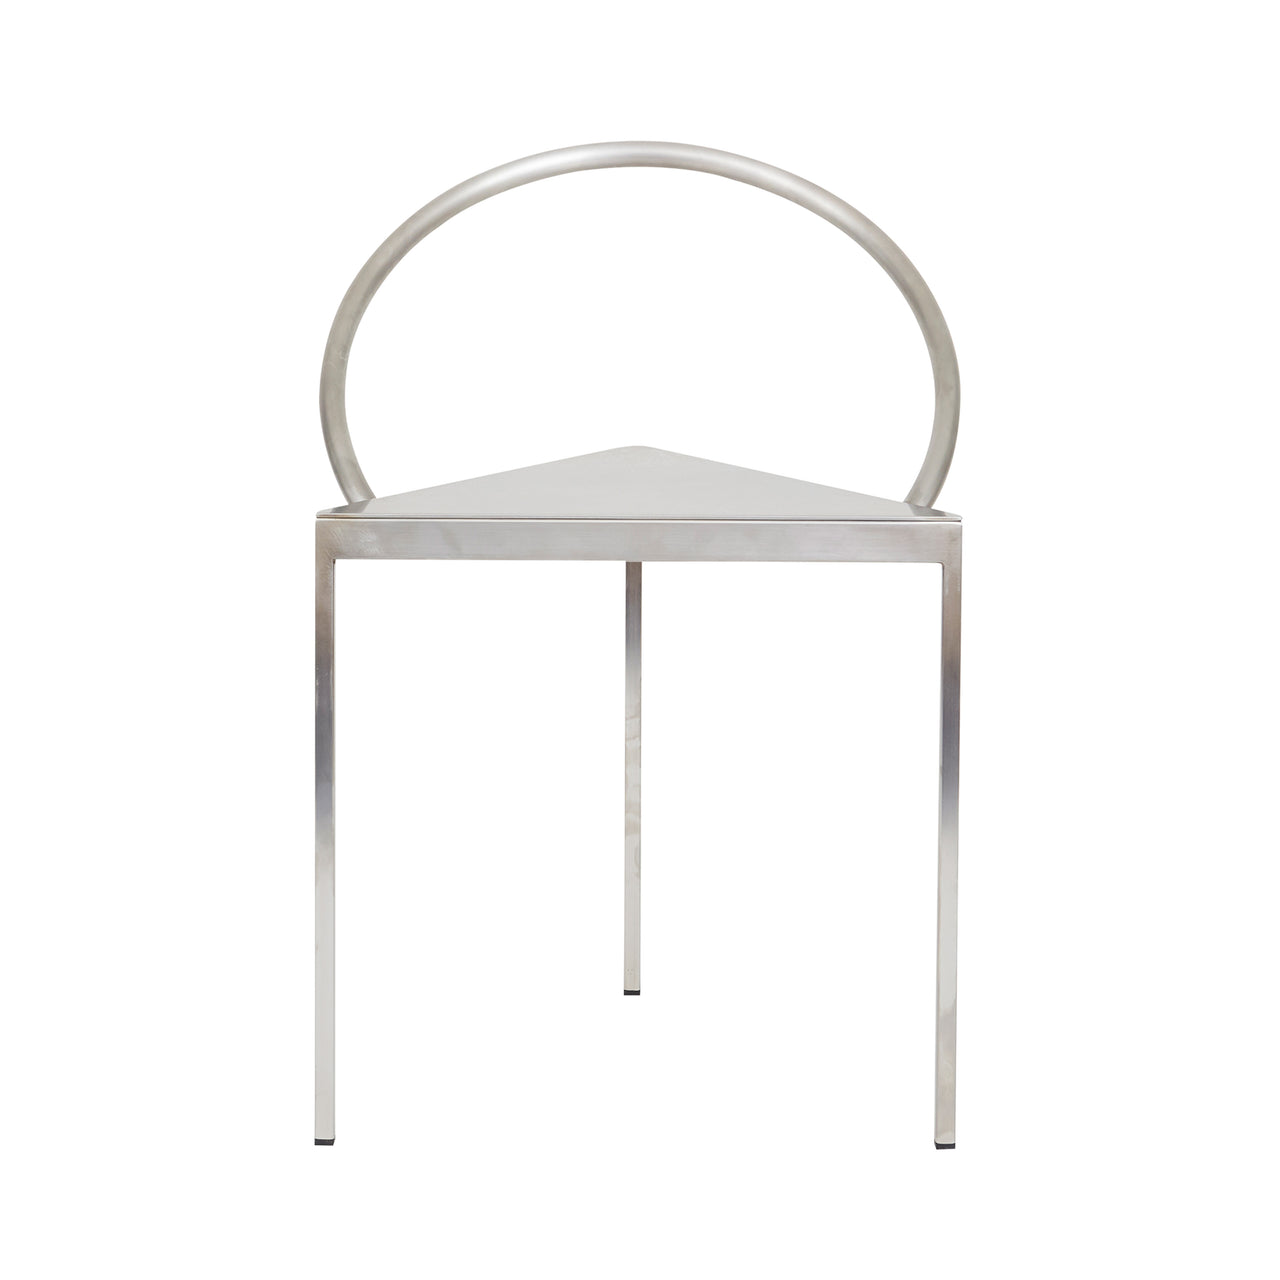 Triangolo Chair: Stainless Steel